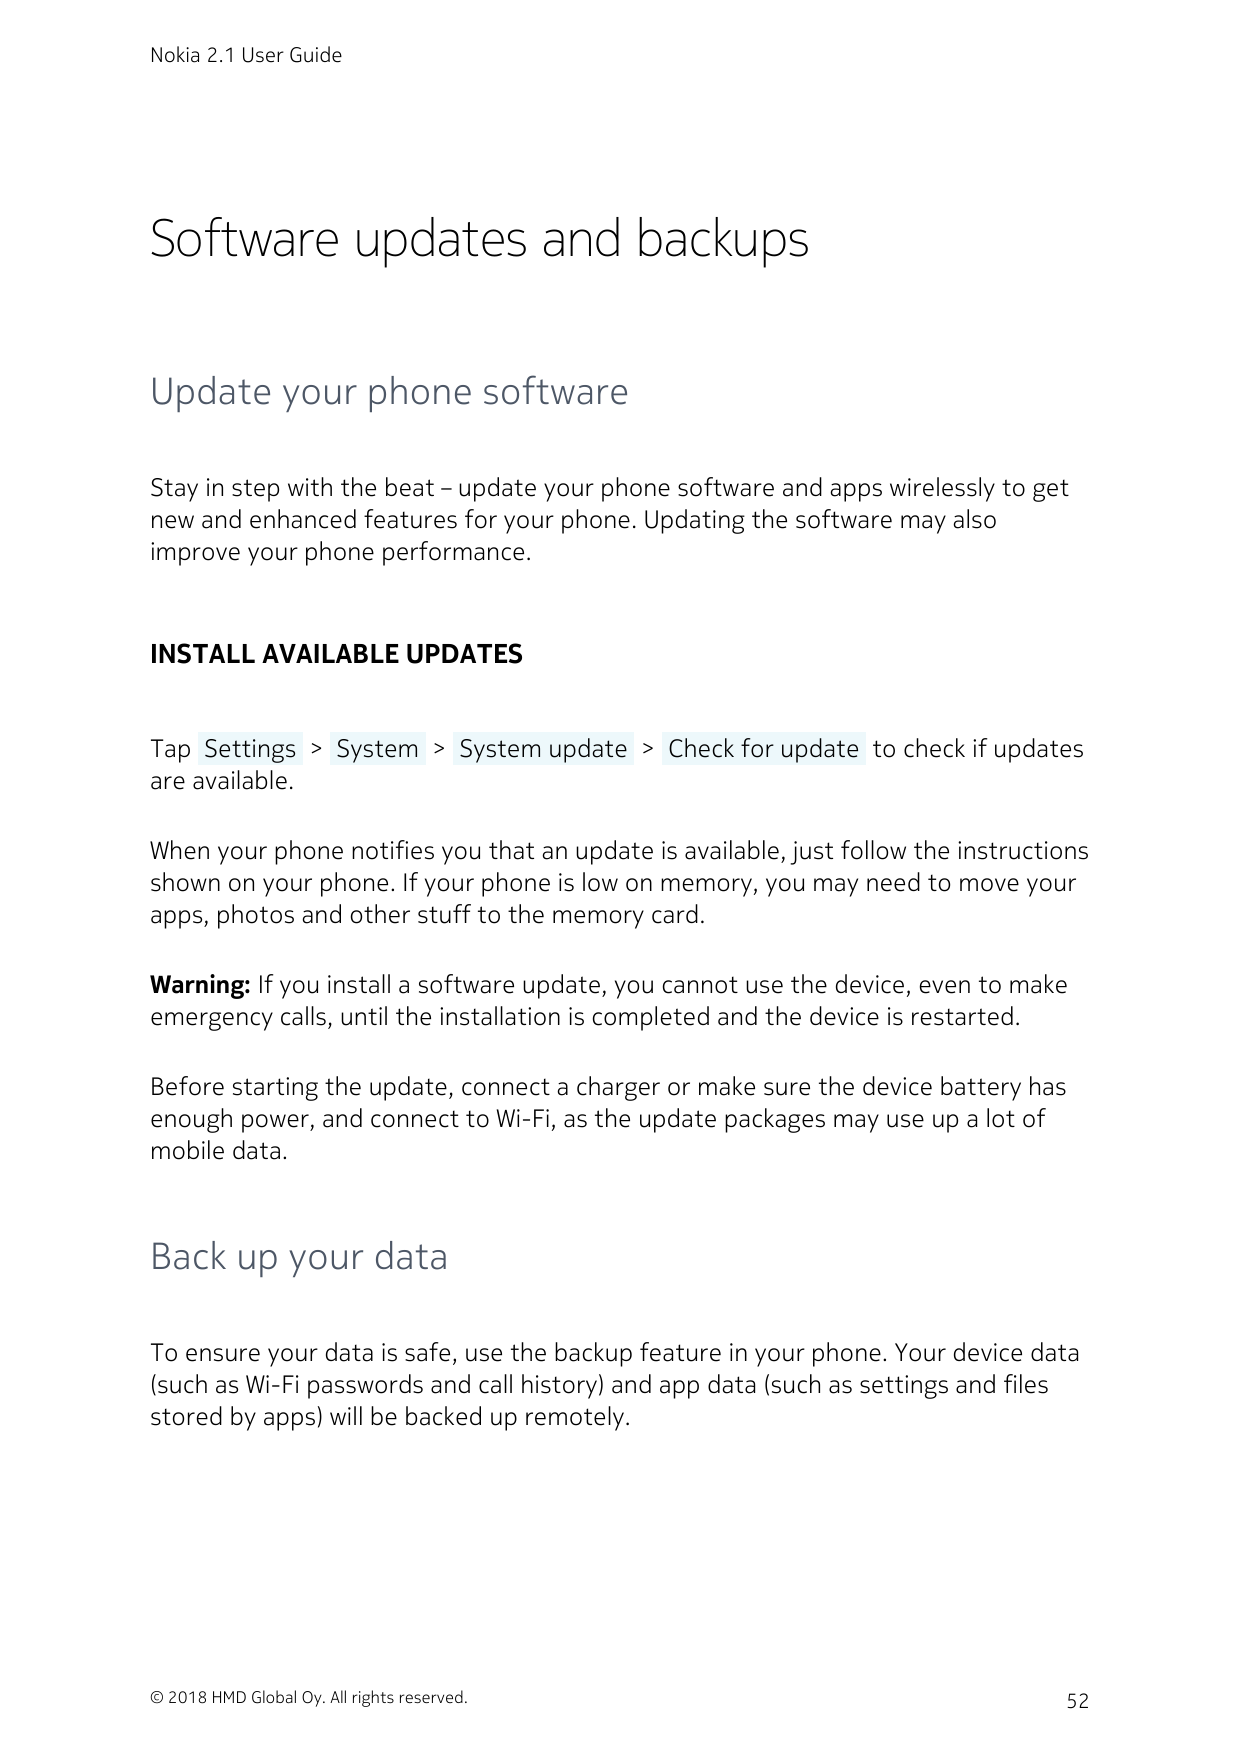 Nokia 2.1 User GuideSoftware updates and backupsUpdate your phone softwareStay in step with the beat – update your phone softwar